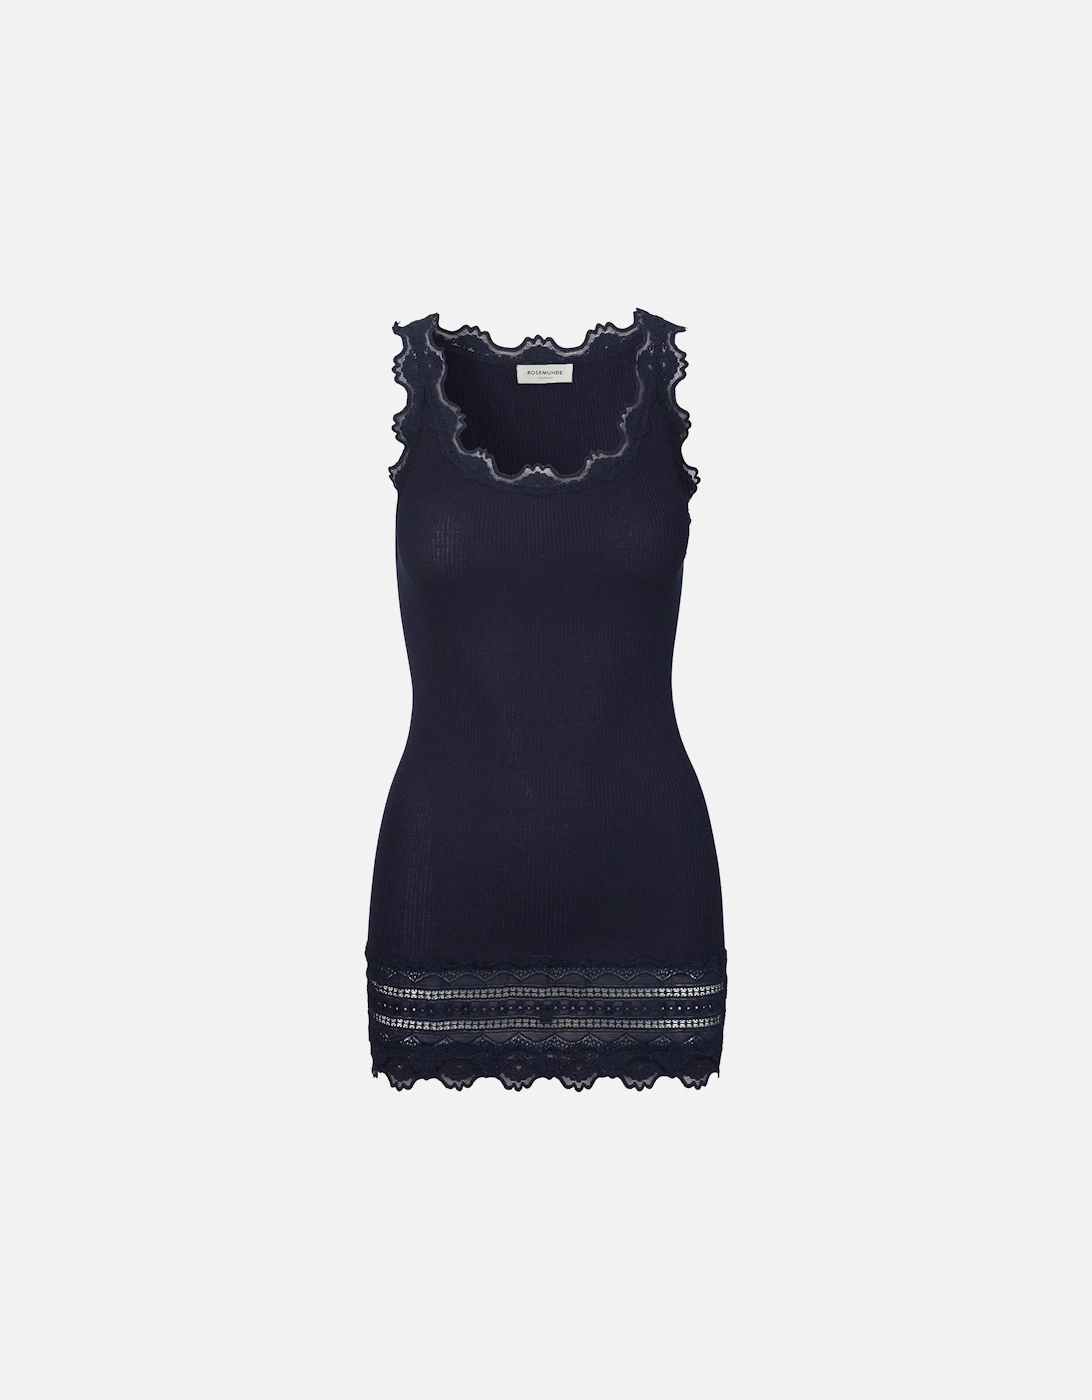 silk and lace vest in navy, 2 of 1